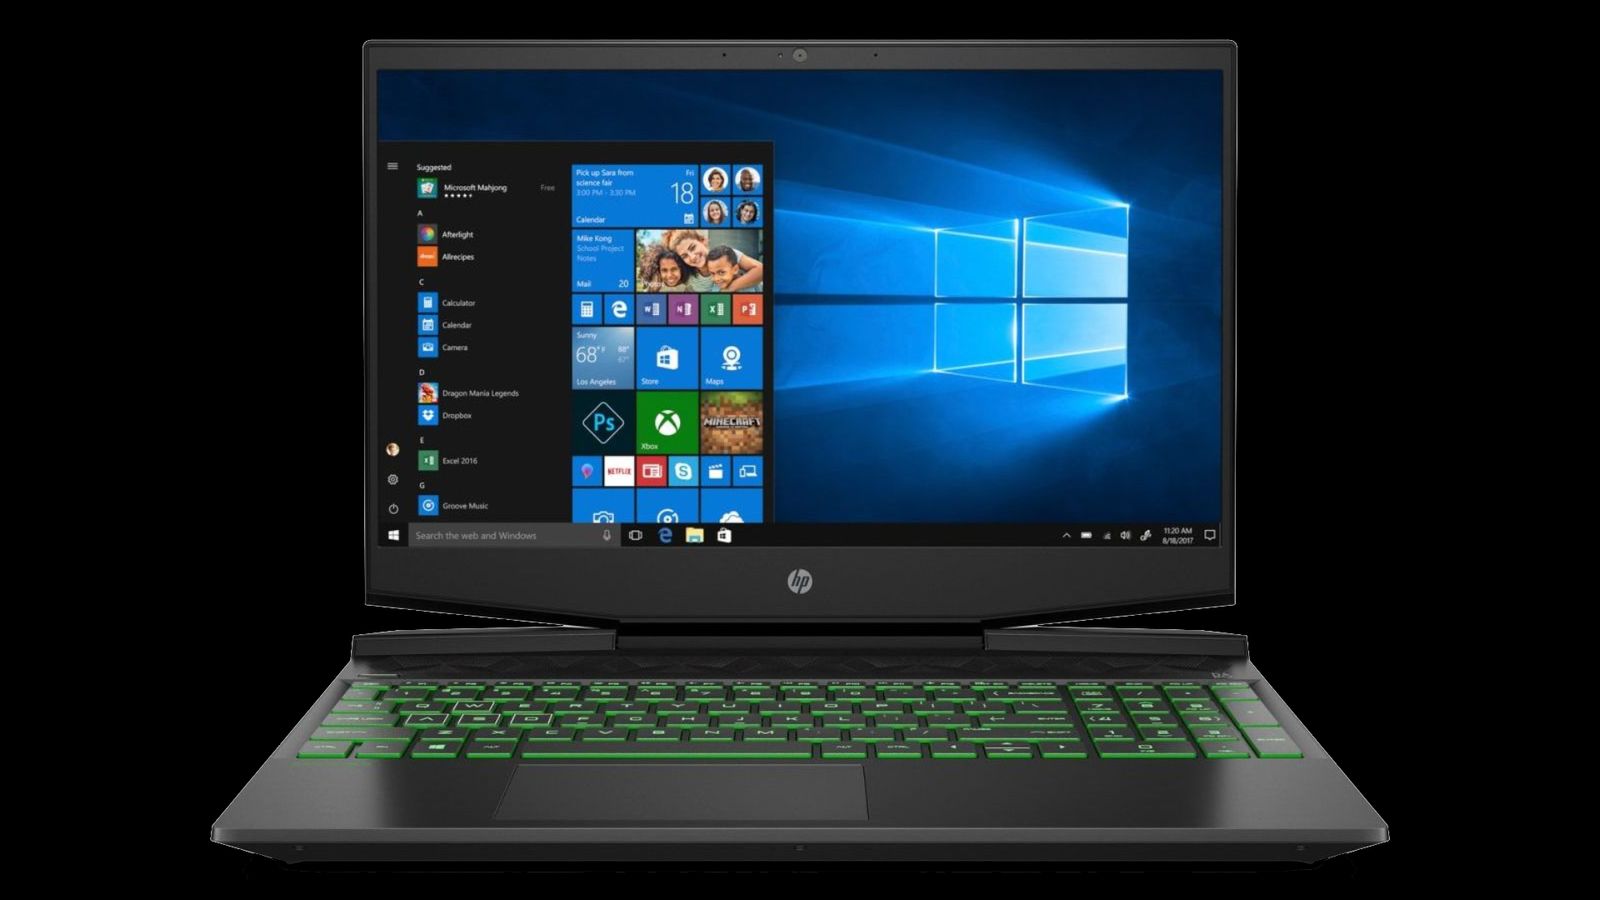 HP Pavilion Gaming 15 product image of a black laptop with green backlit keys.